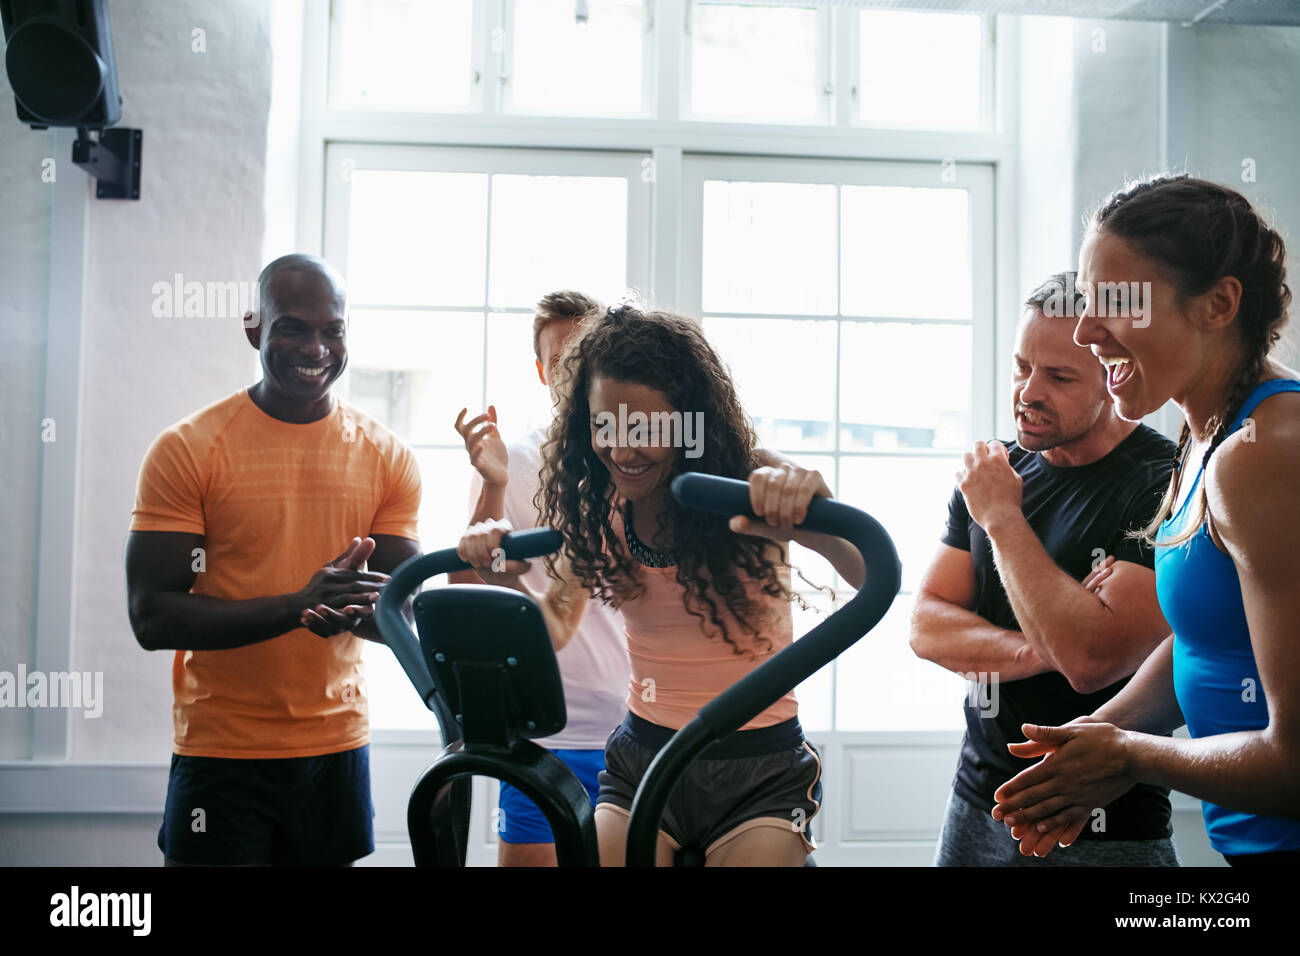 Group of people cheering on their female friend riding a stationary bike while working out together in a gym Stock Photo